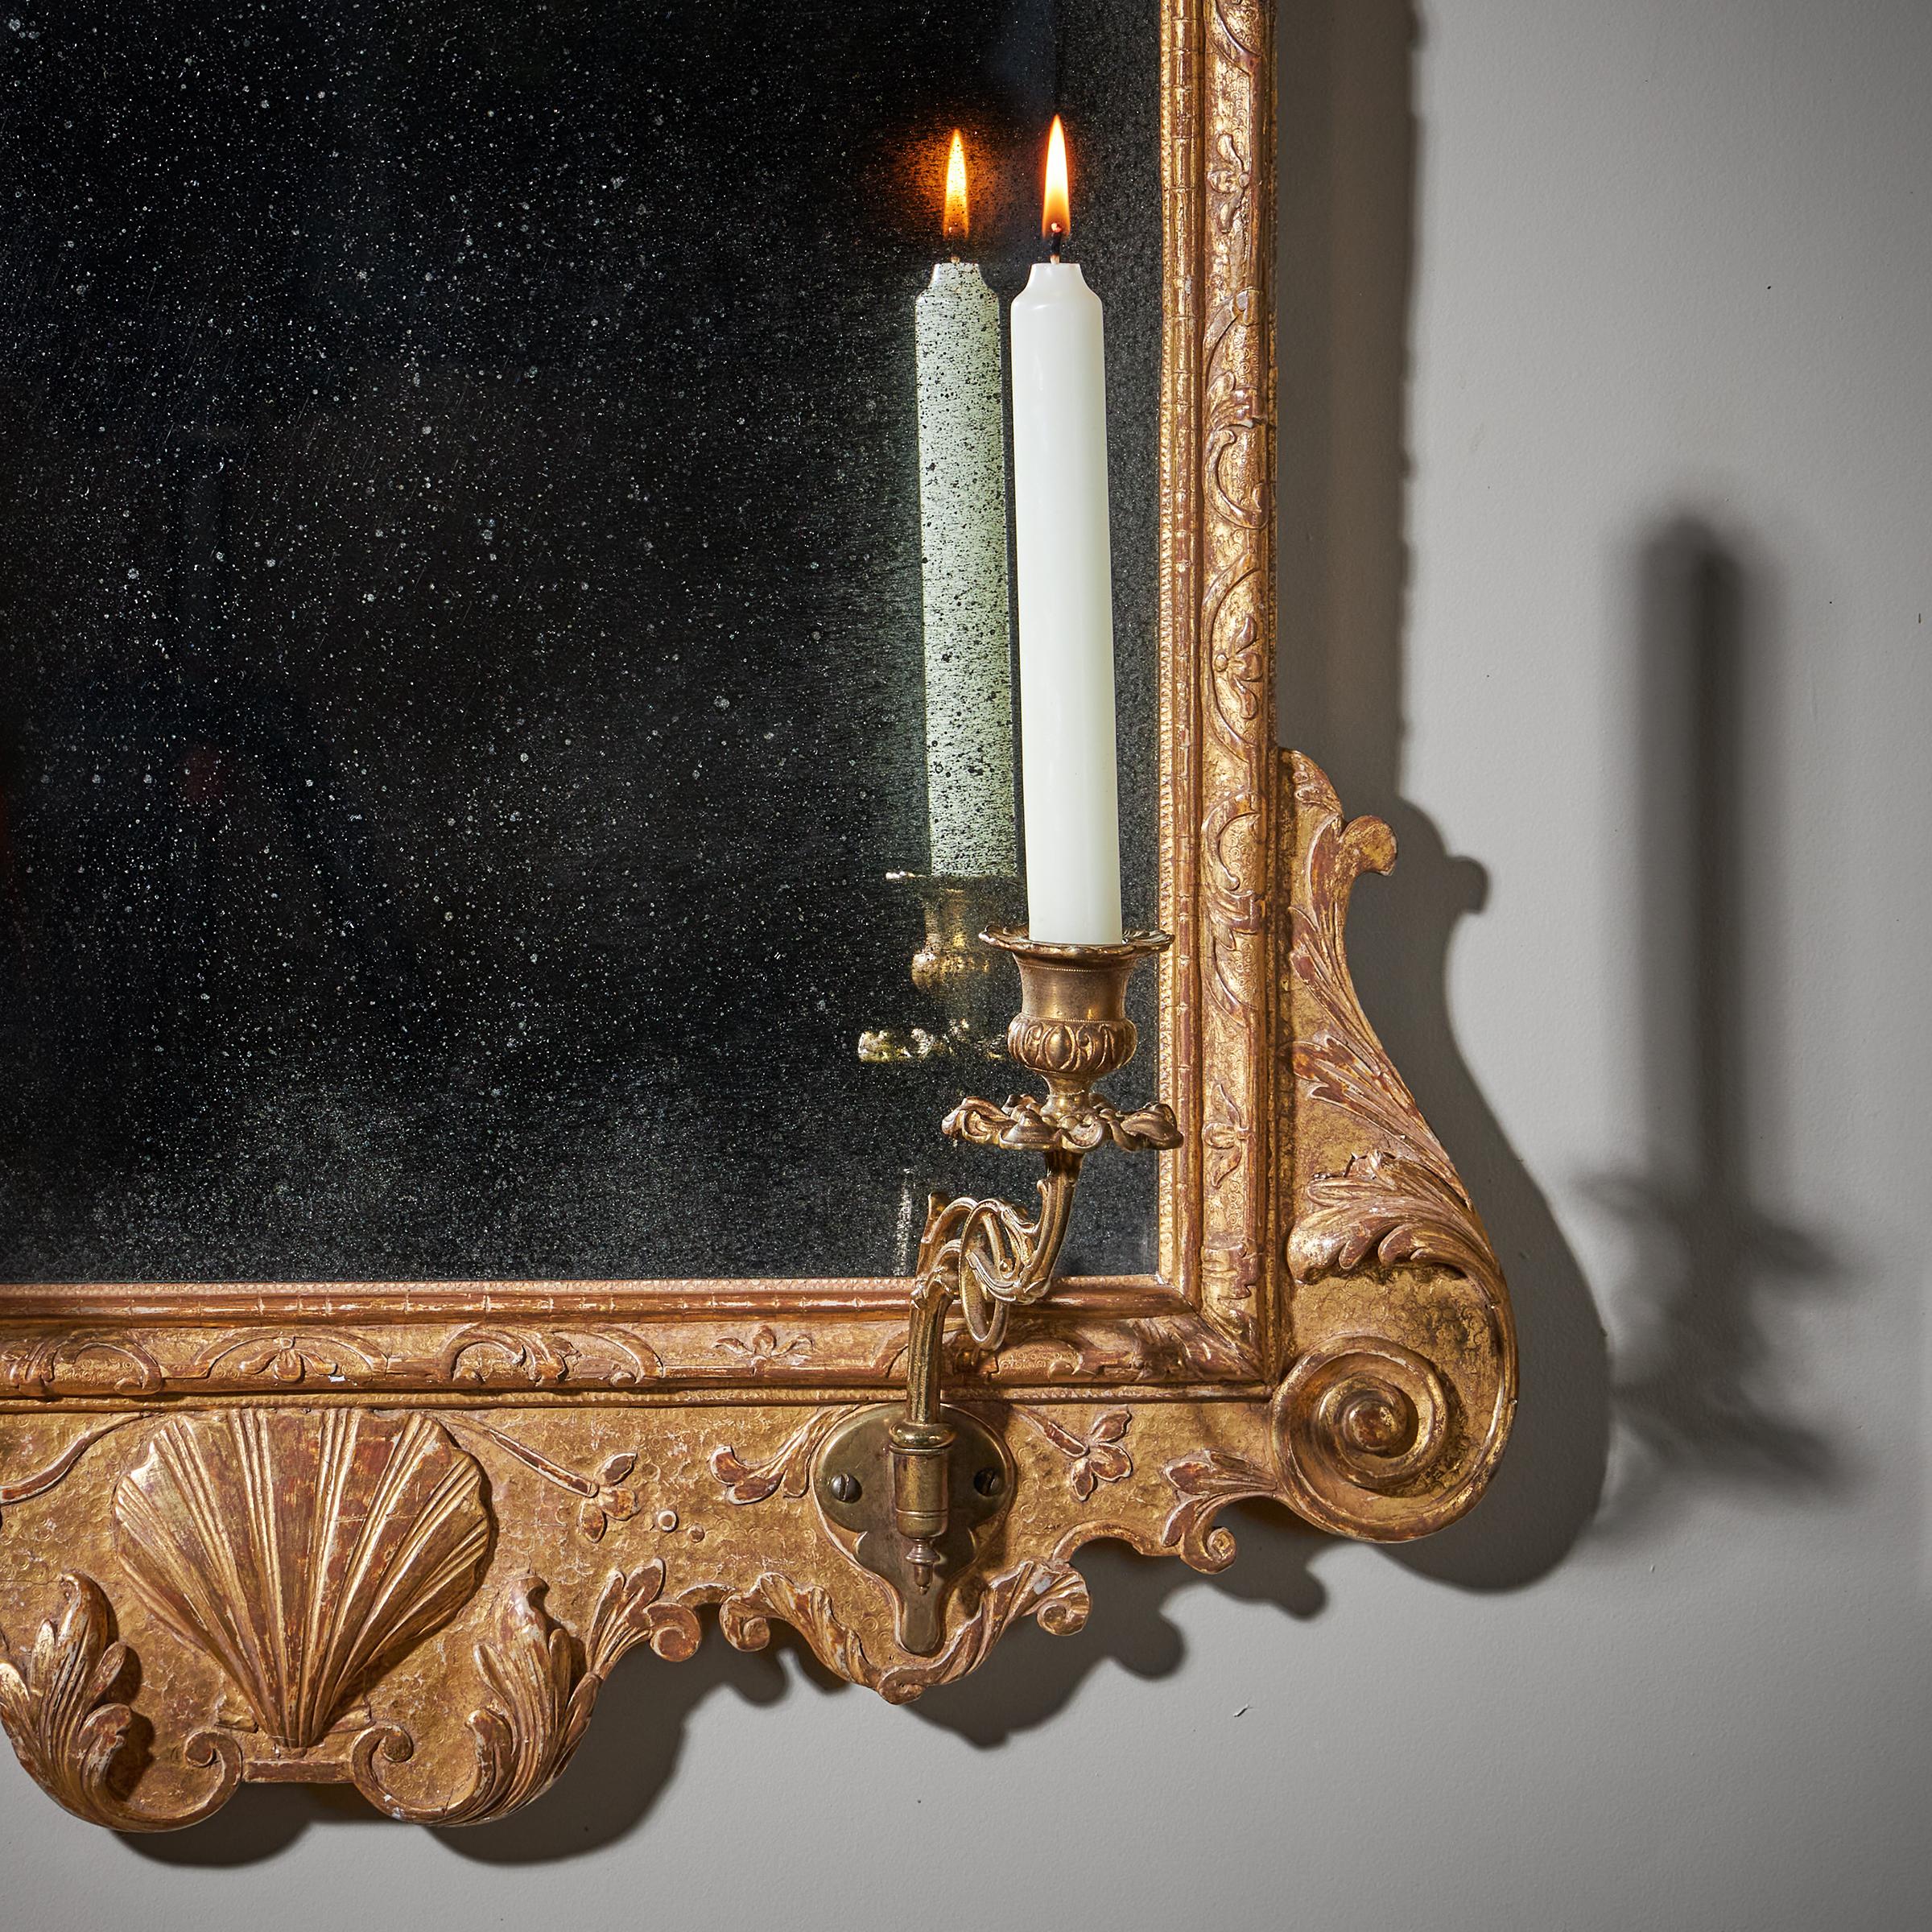 Fine 18th Century George I Gilt Gesso Pier or Console Mirror, Manner of Belchier In Good Condition For Sale In Oxfordshire, United Kingdom